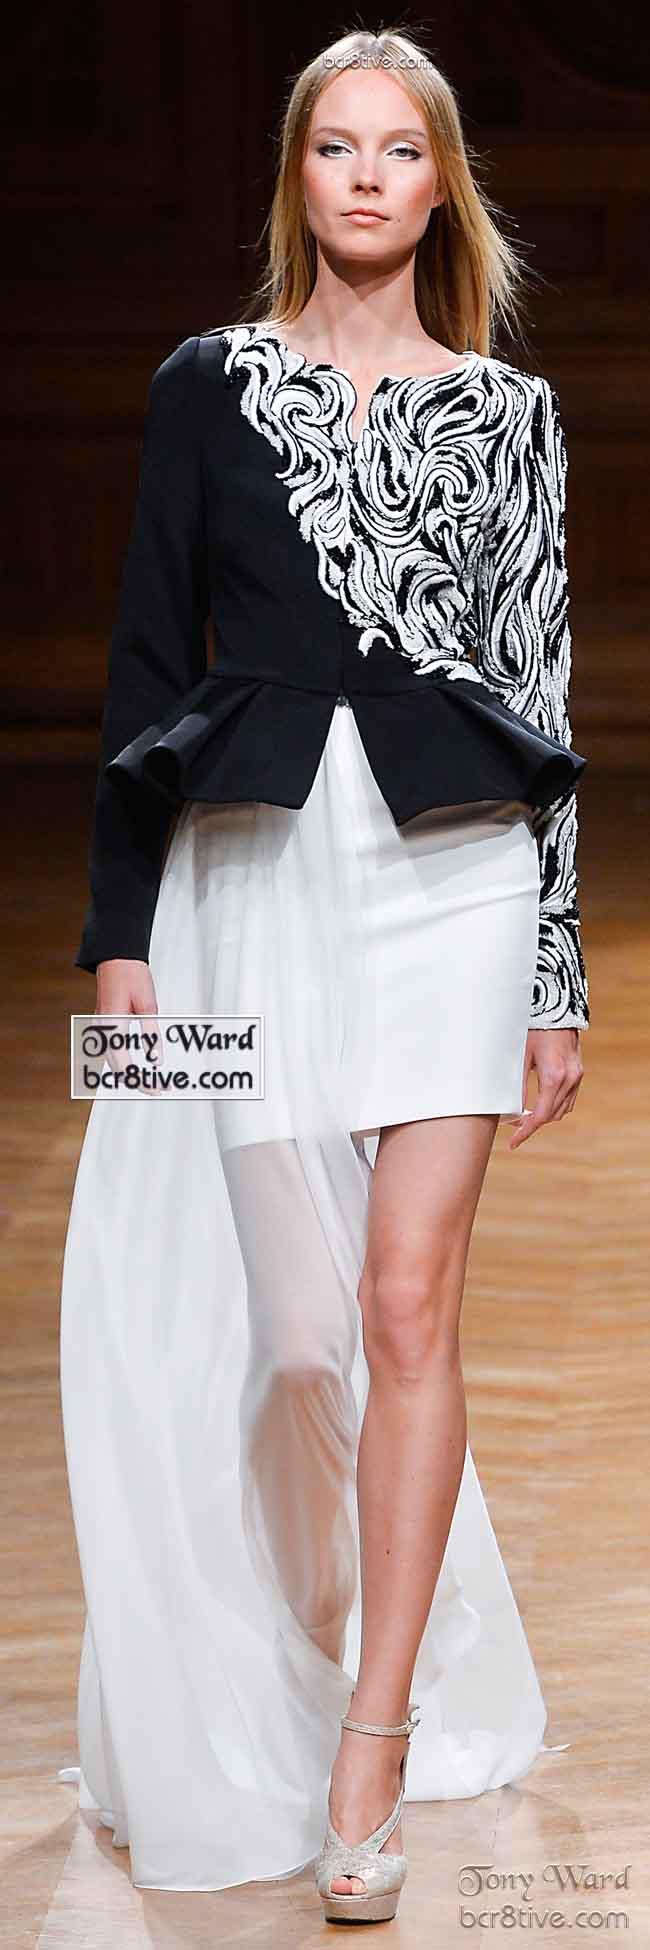 Ultra Creative - Black and White Embroidered Peplum Jacket, White Skirt Layered in Floor Length Chiffon